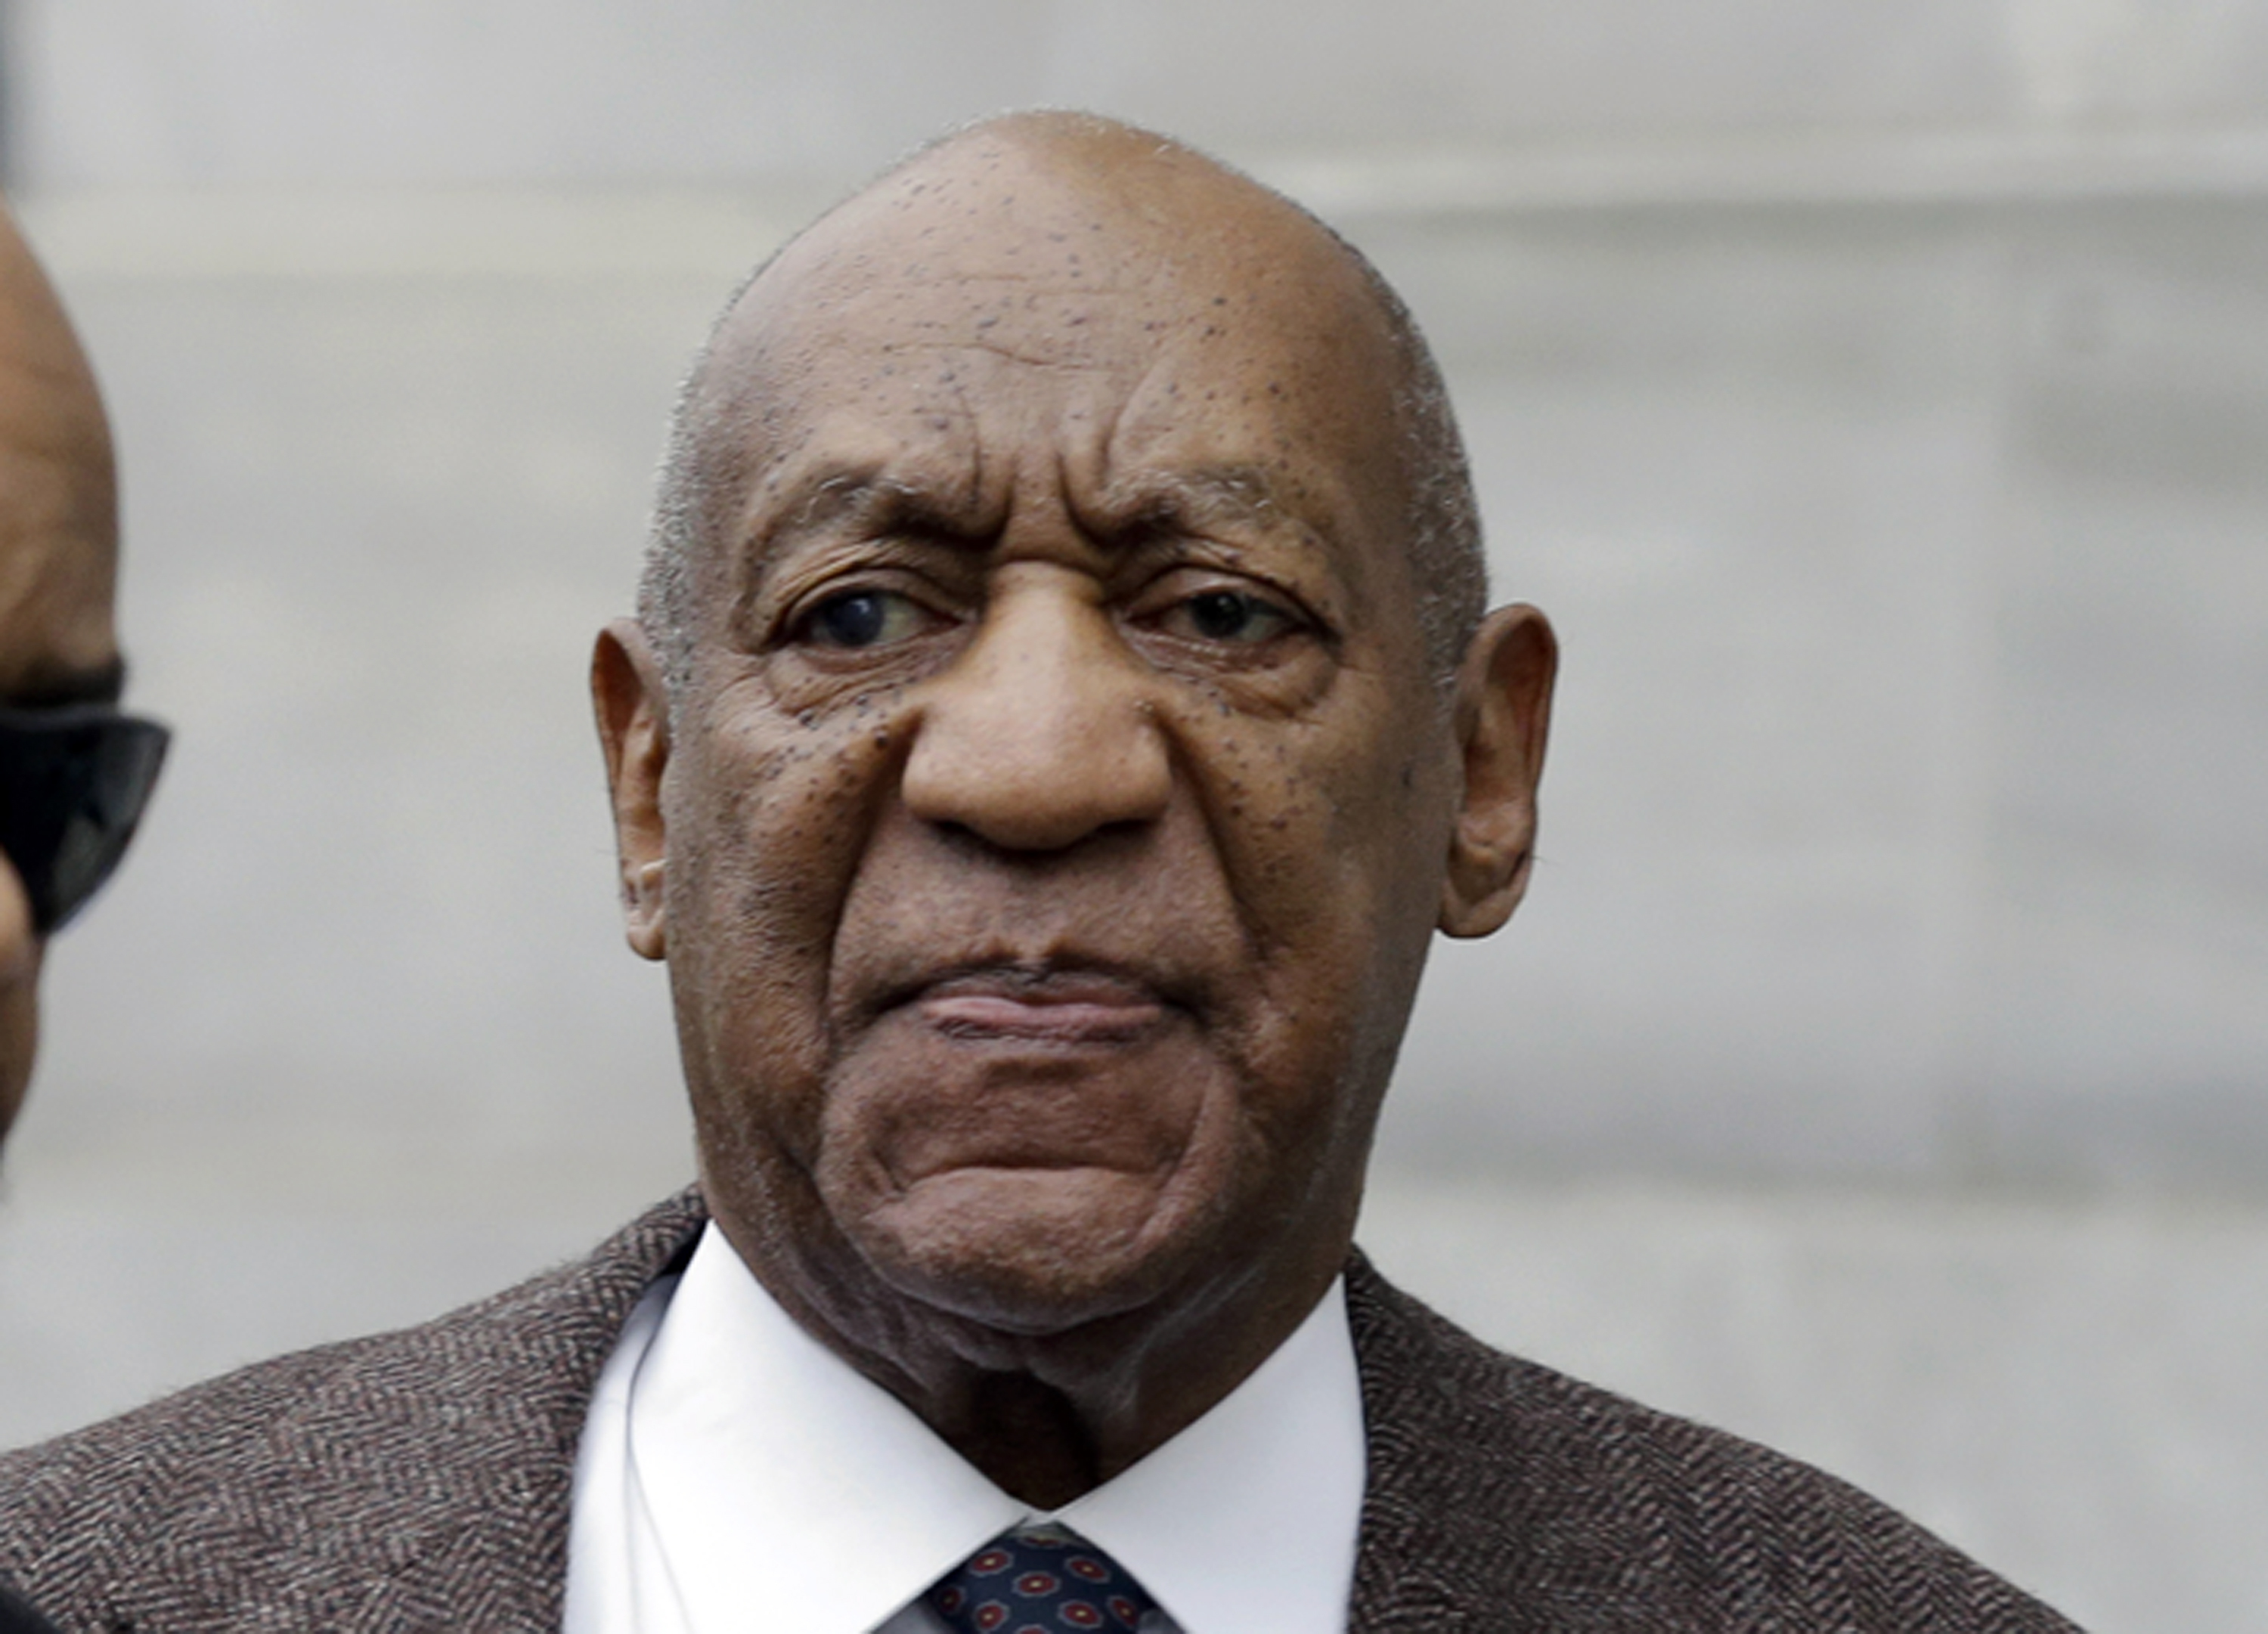 Bill Cosby arrives for a court appearance in Norristown, Pa. on Feb. 3, 2016. (Mel Evans—AP)